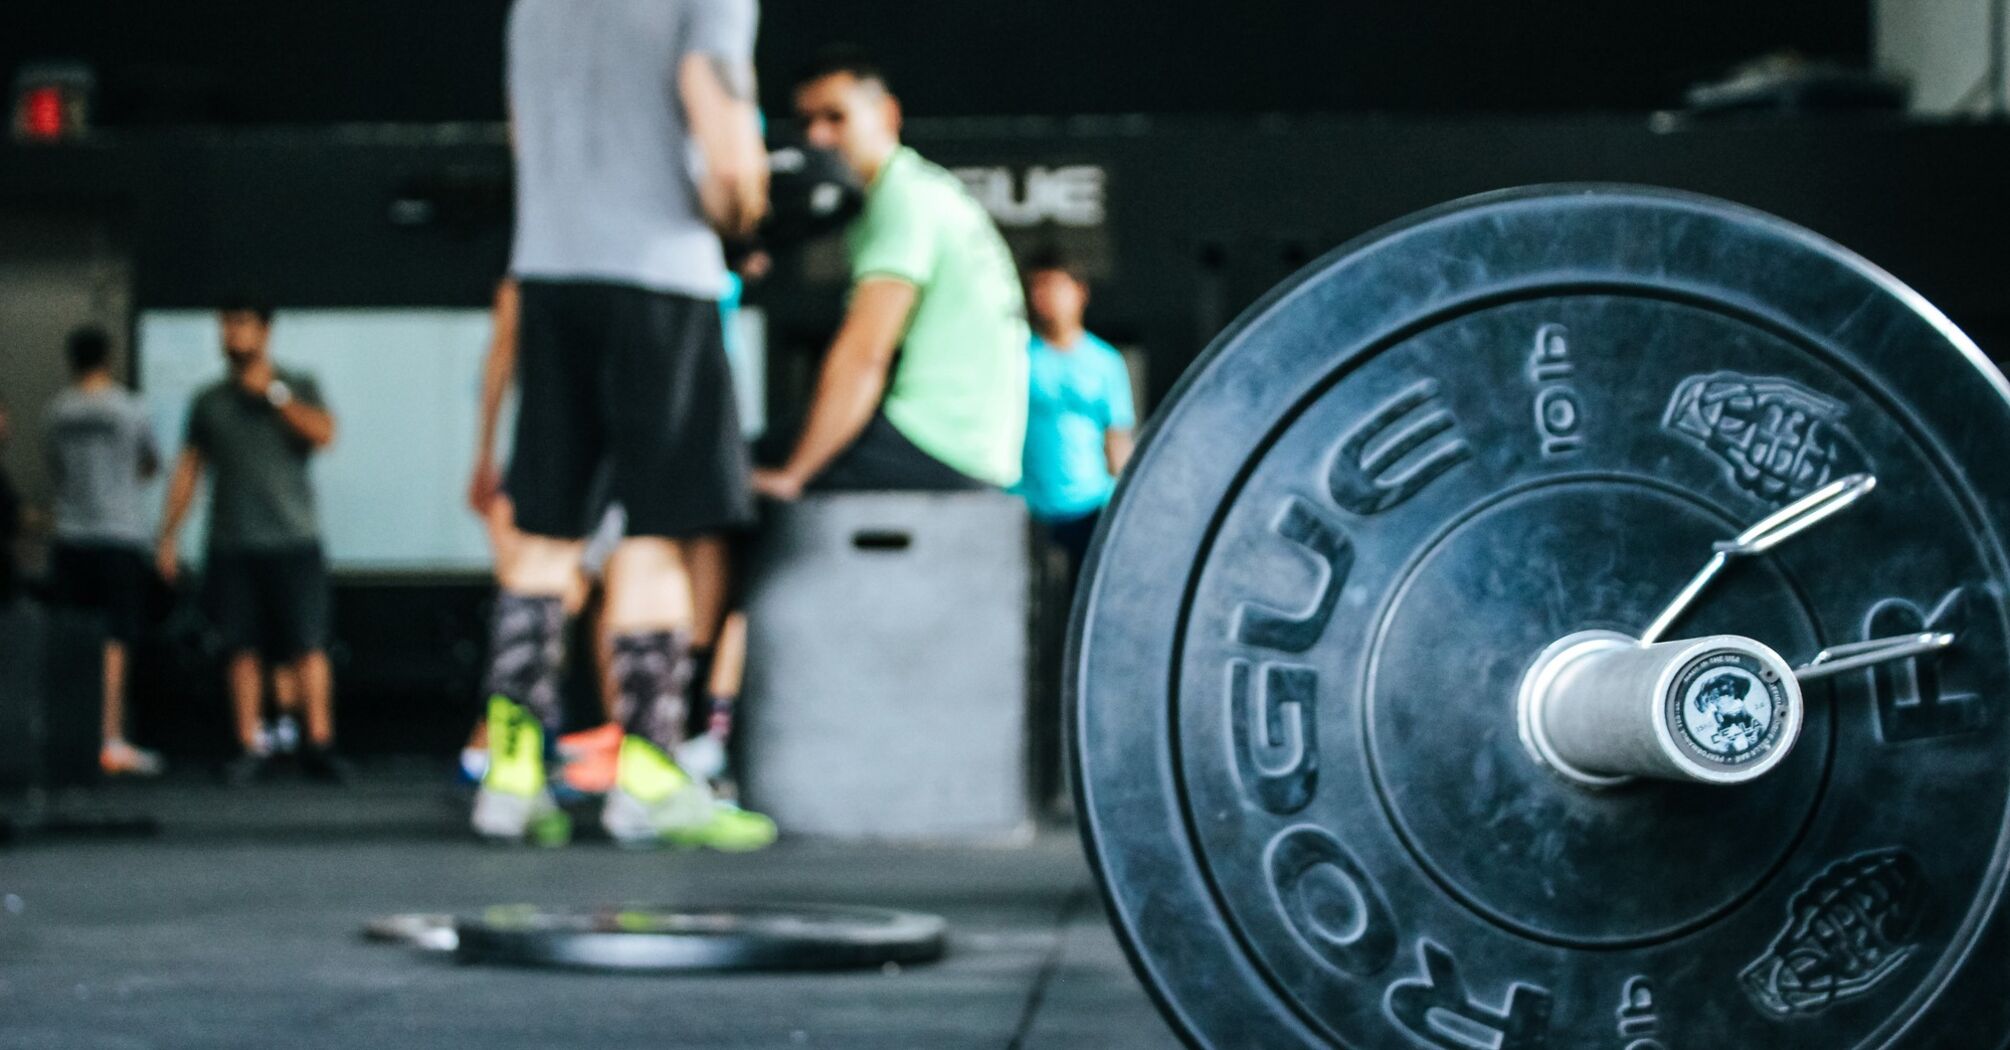 Advantages and disadvantages of group training in the gym